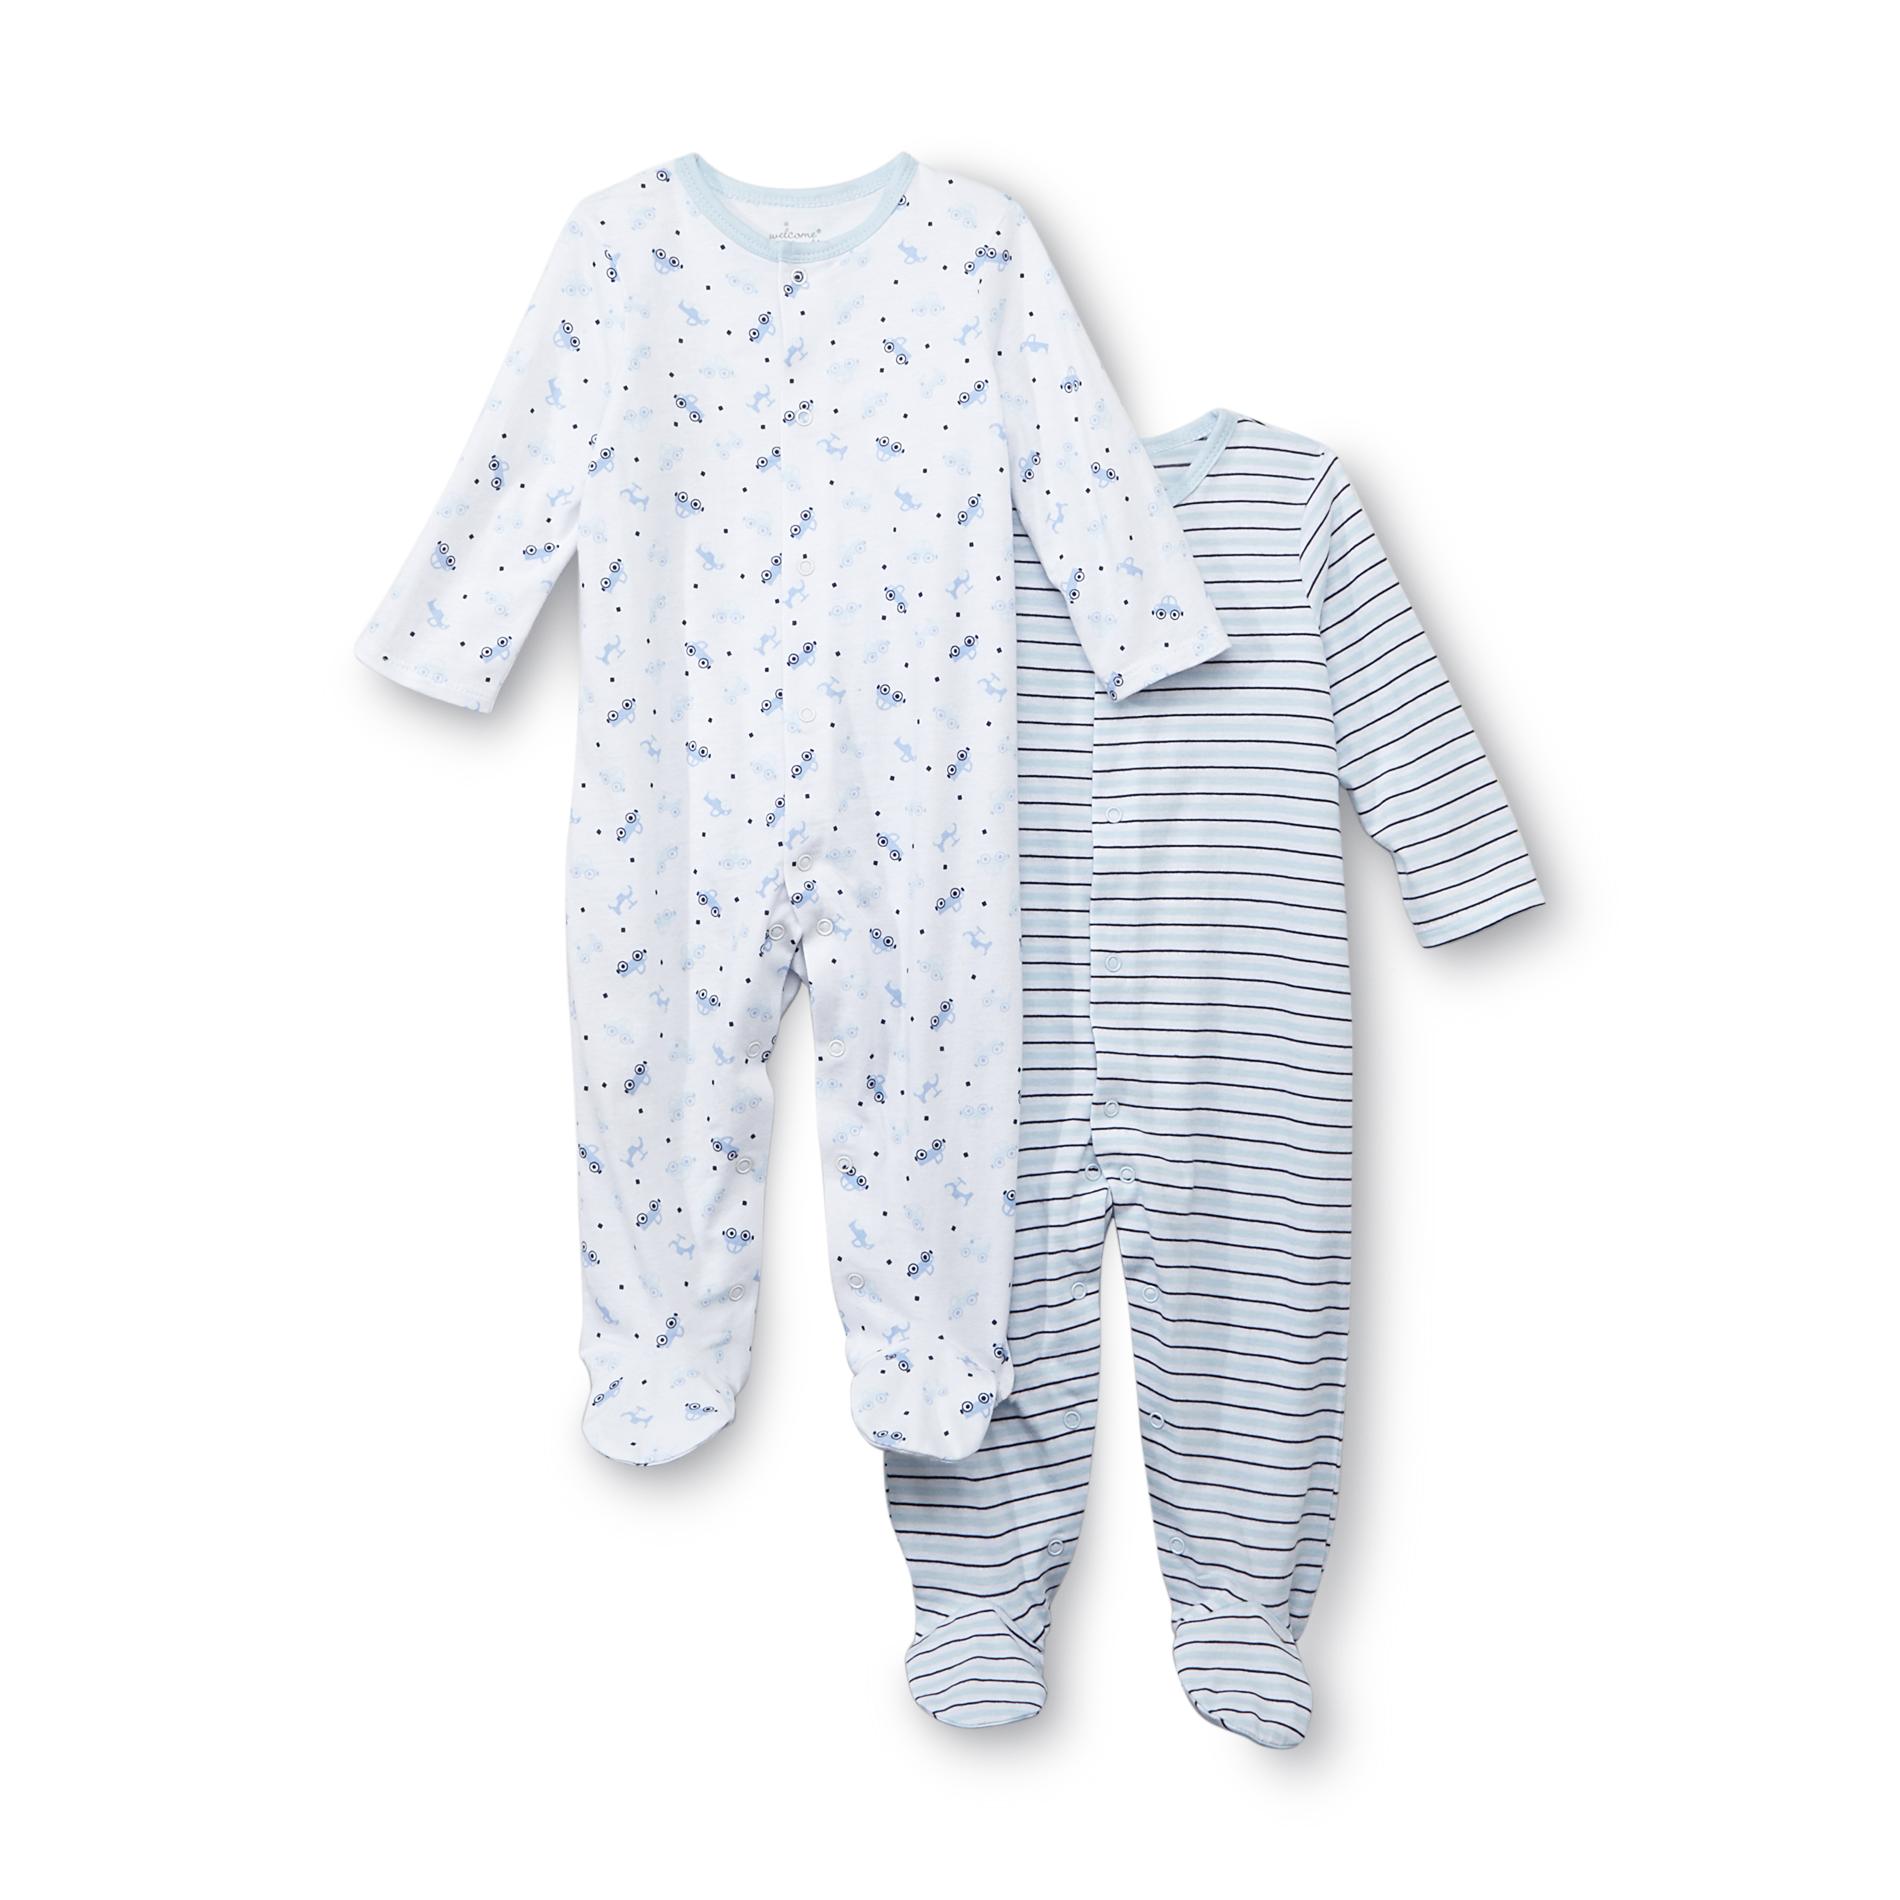 Welcome to the World Newborn Boy's 2-Pack Footed Sleeper Pajamas